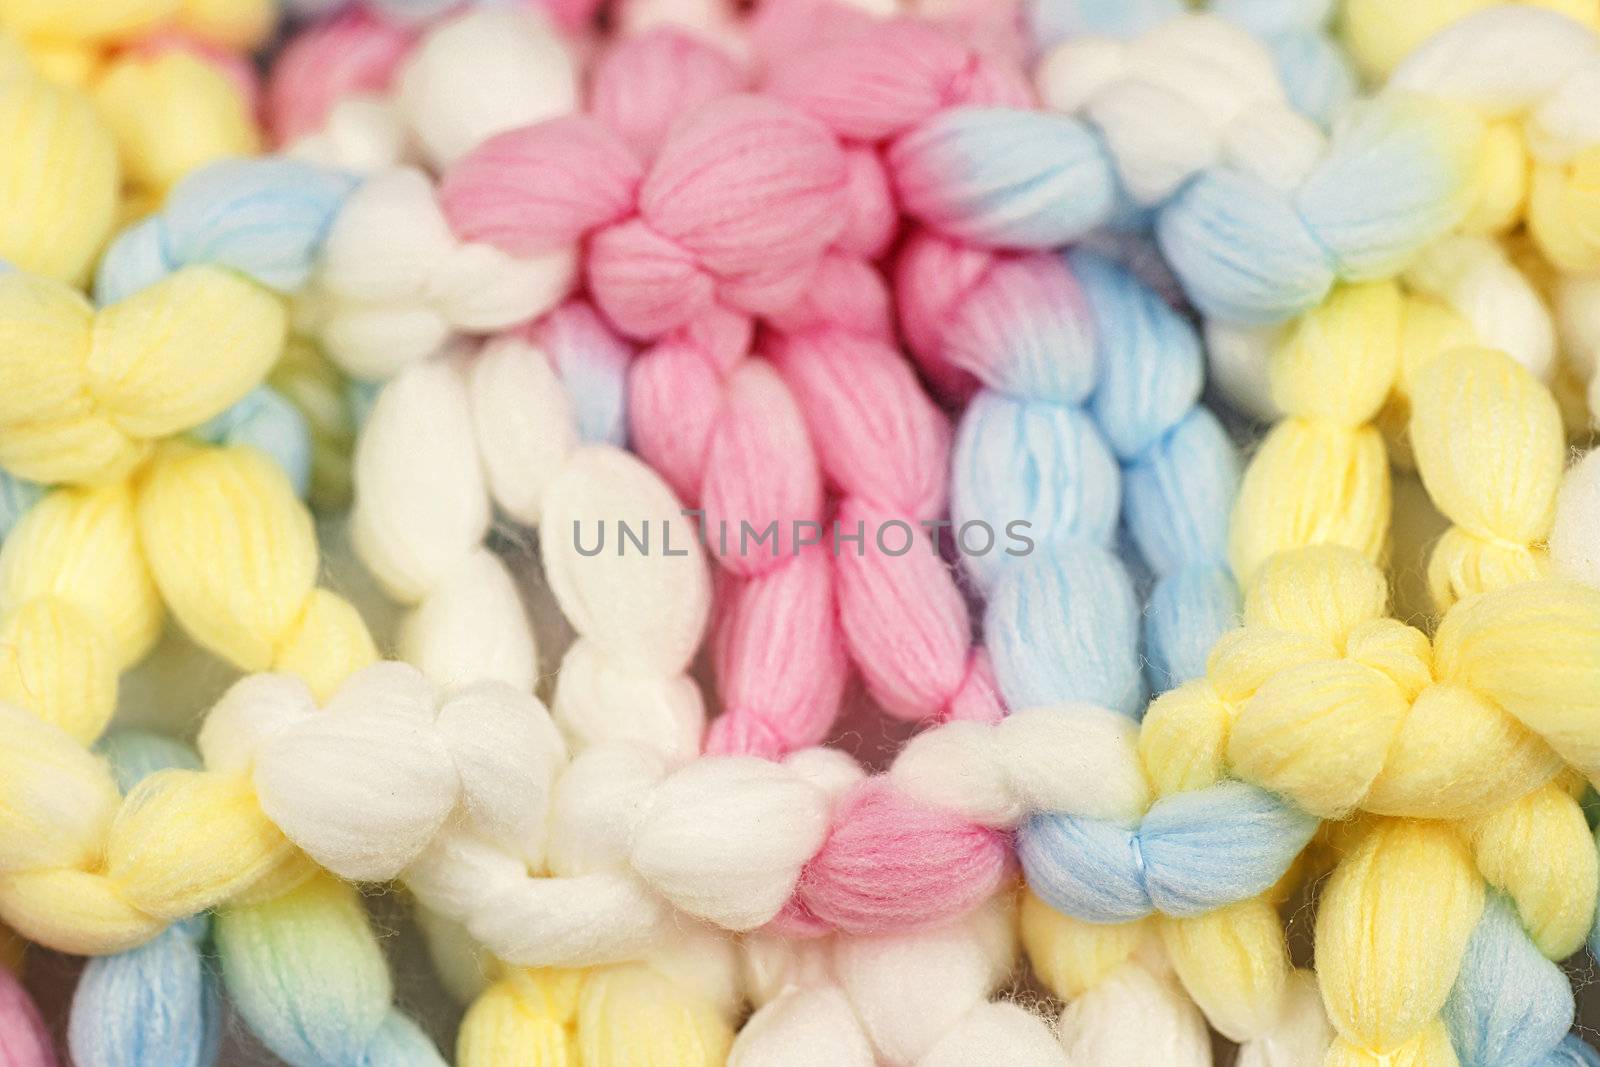 Macro shot of knitted colorful pastel or baby color wool or yarn, great baby, arts and crafts or texture abstract background.